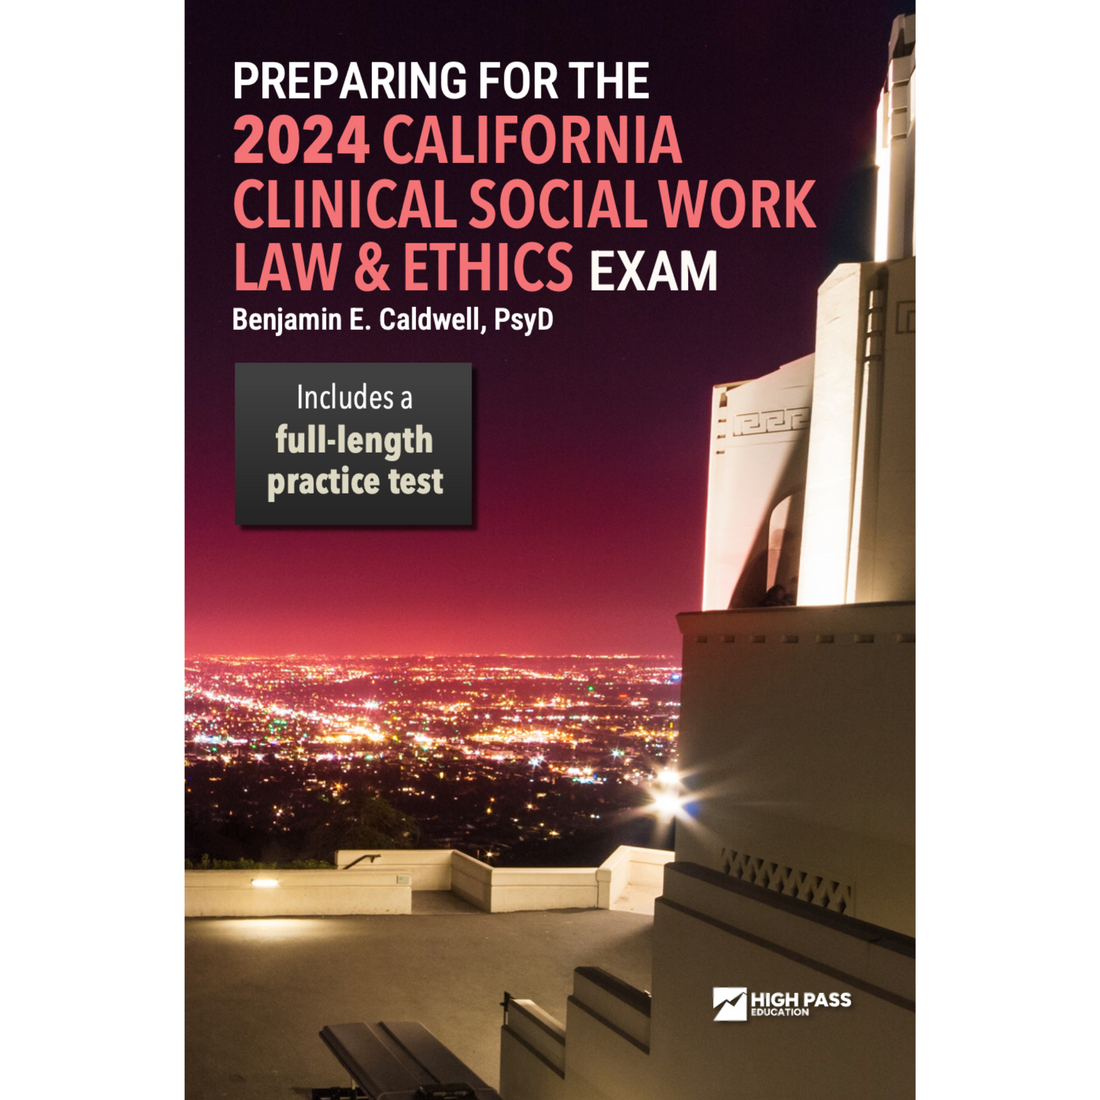 Preparing for the 2024 California Clinical Social Work Law & Ethics Exam